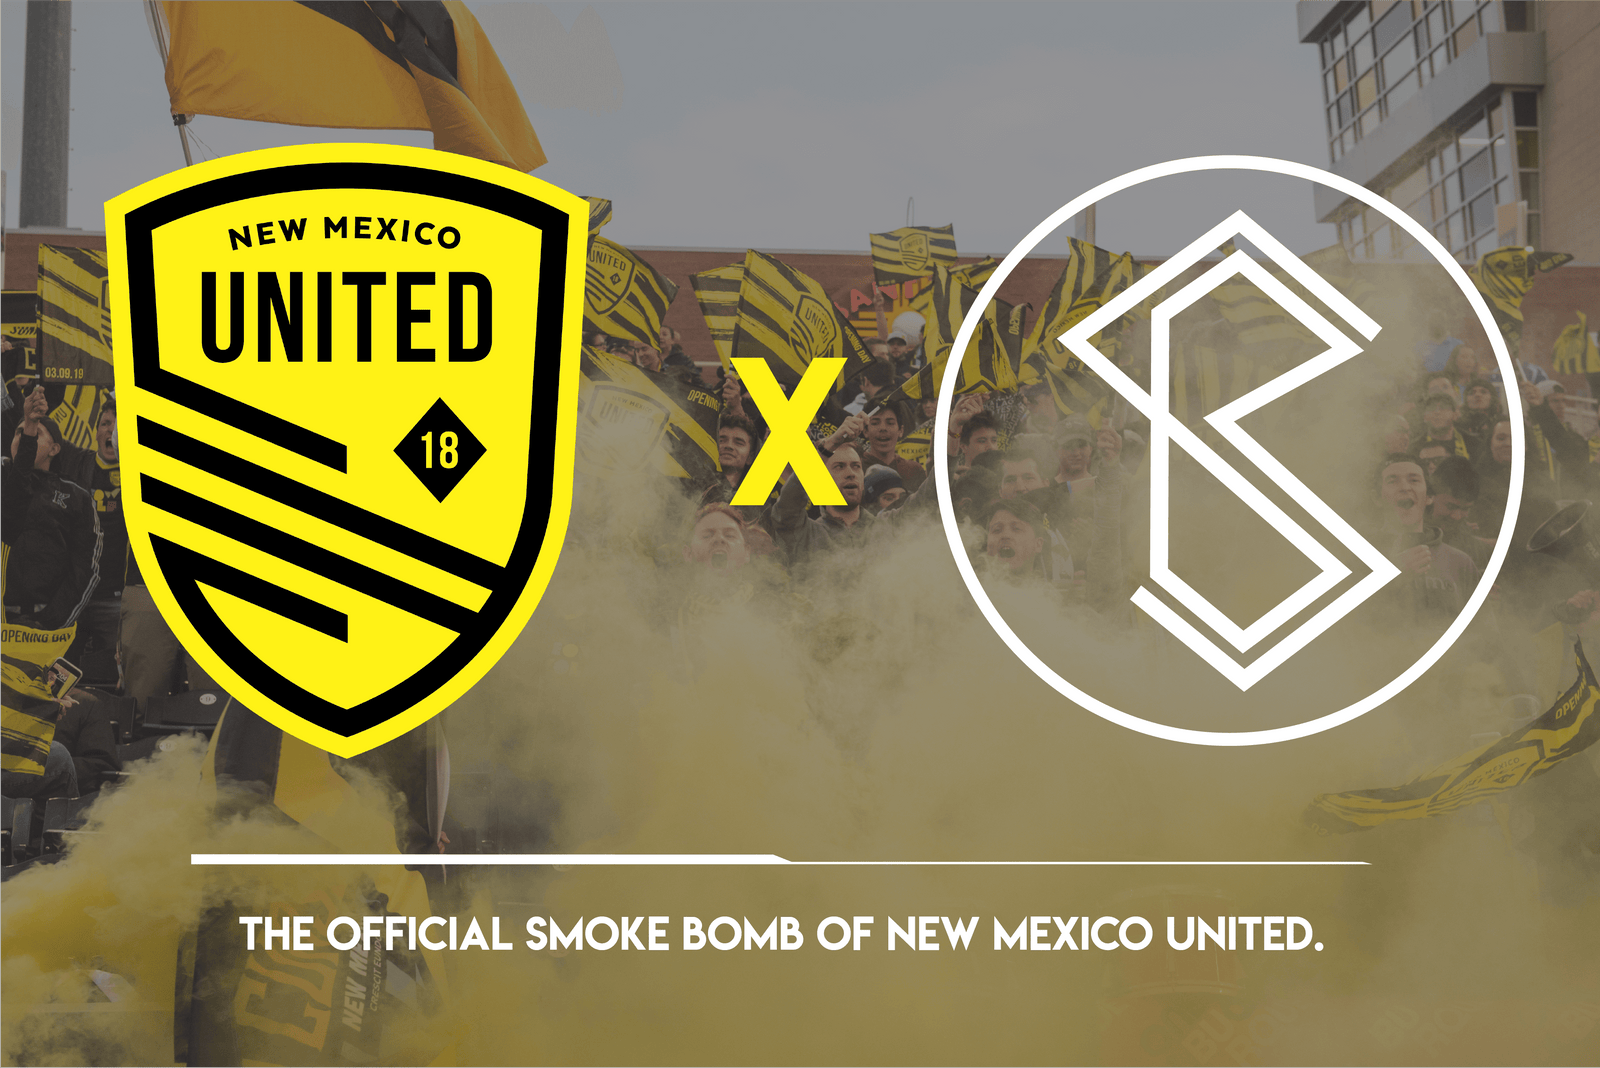 Shutter Bombs Become the Official Smoke Bomb of New Mexico United Soccer Team!